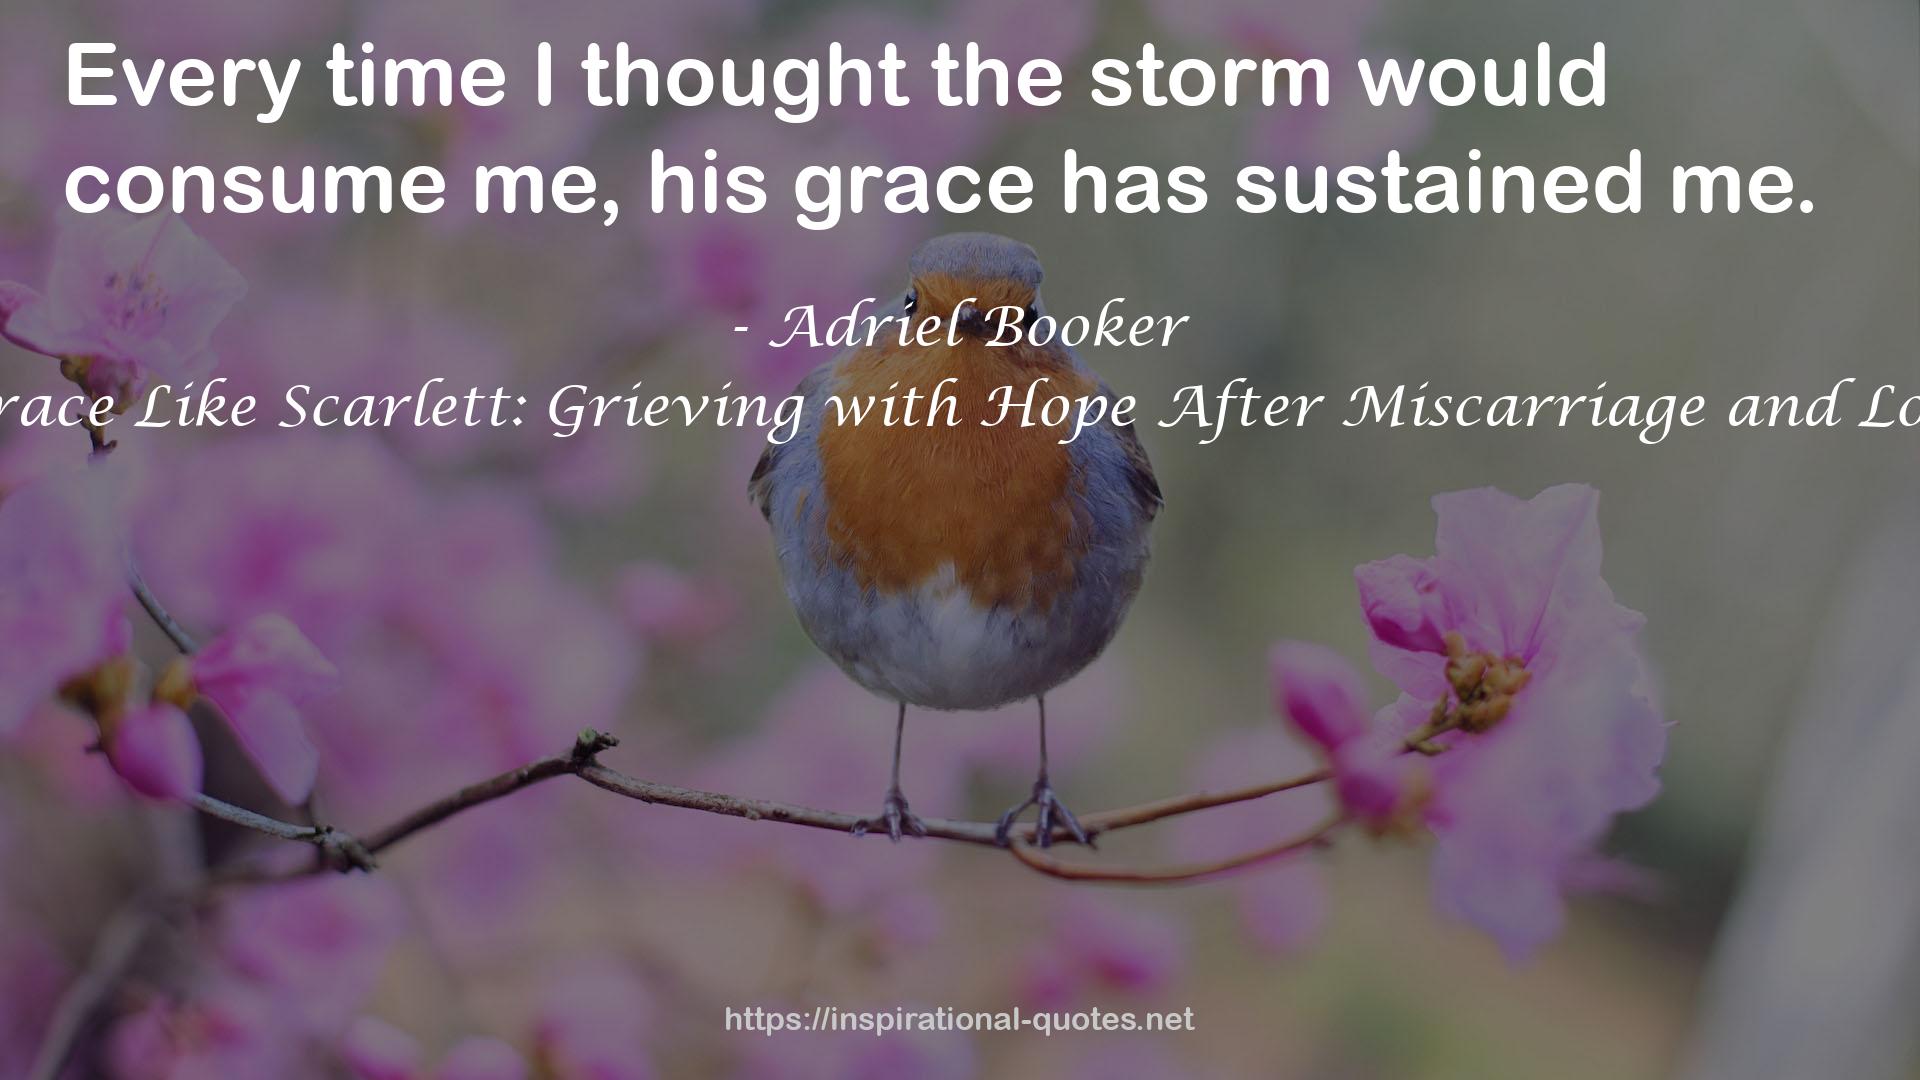 Grace Like Scarlett: Grieving with Hope After Miscarriage and Loss QUOTES